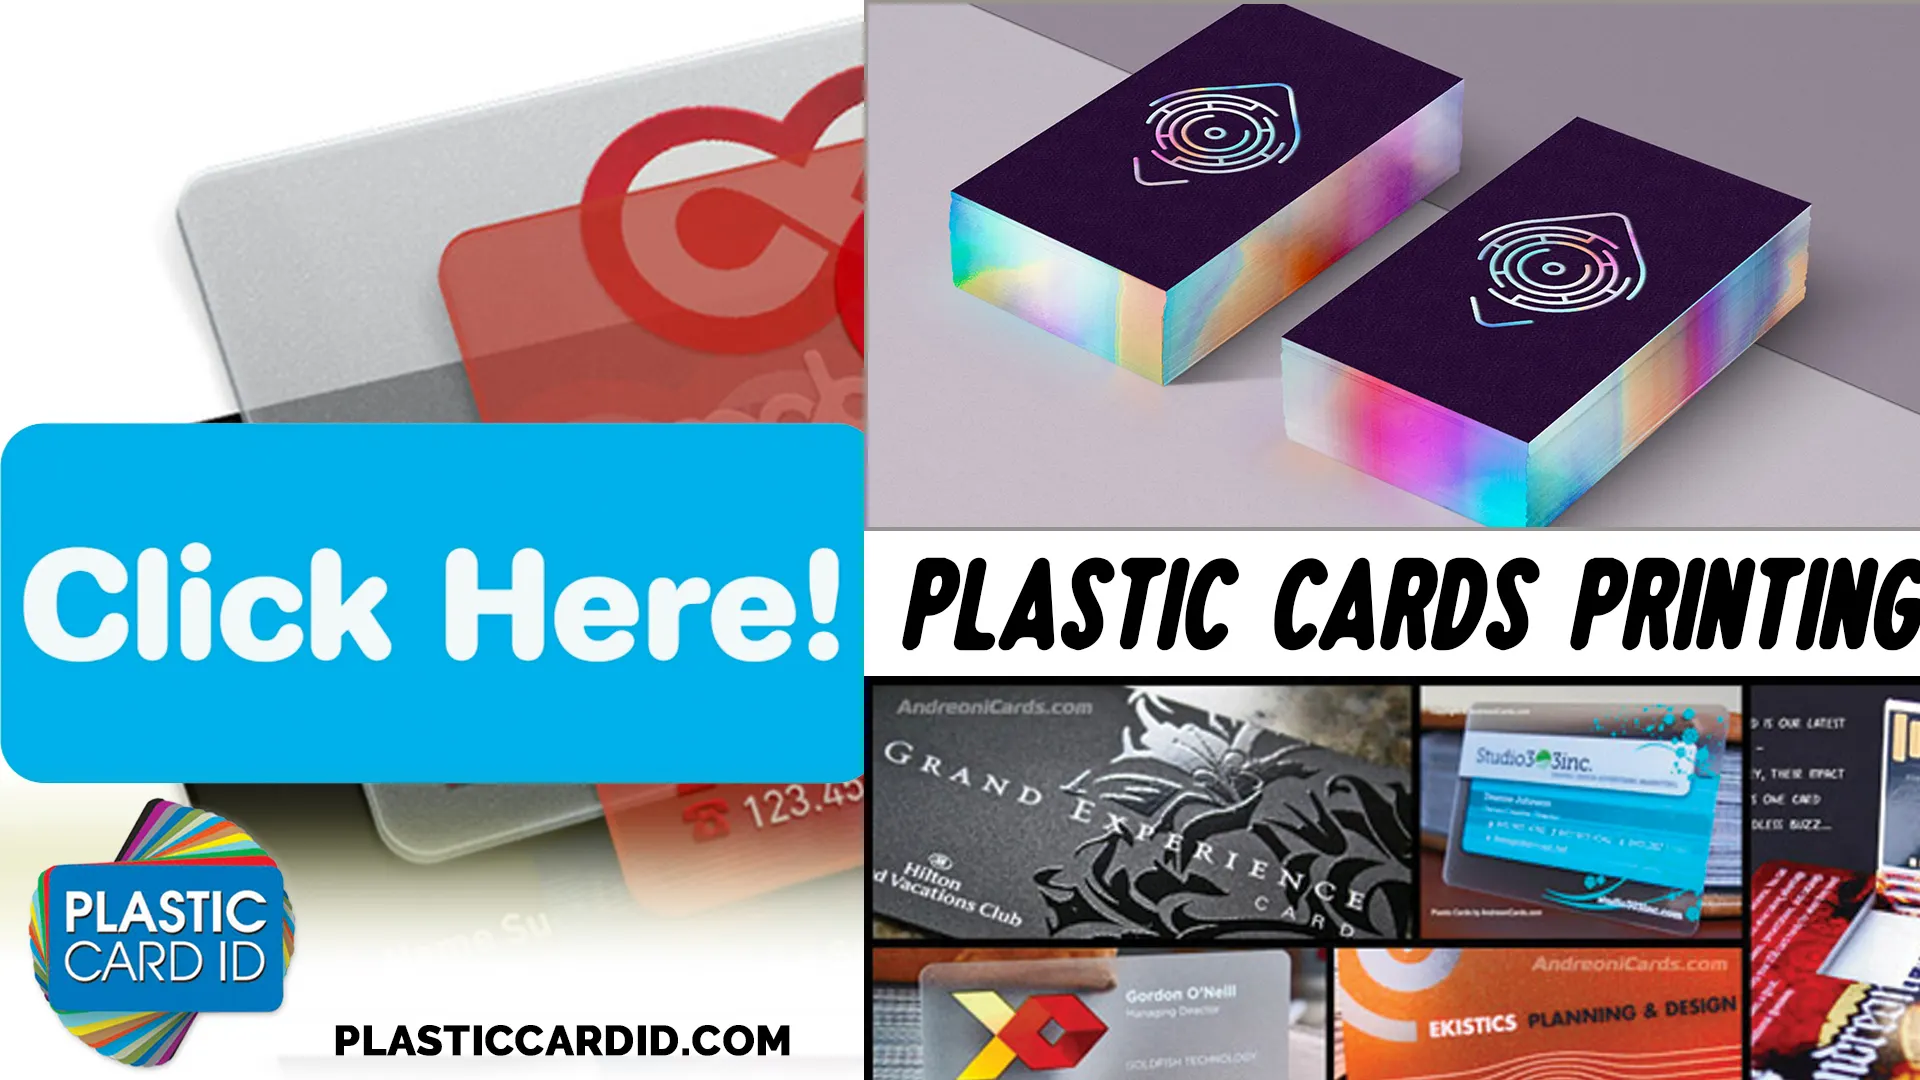 Embracing the Reusability and Recycling of Cards